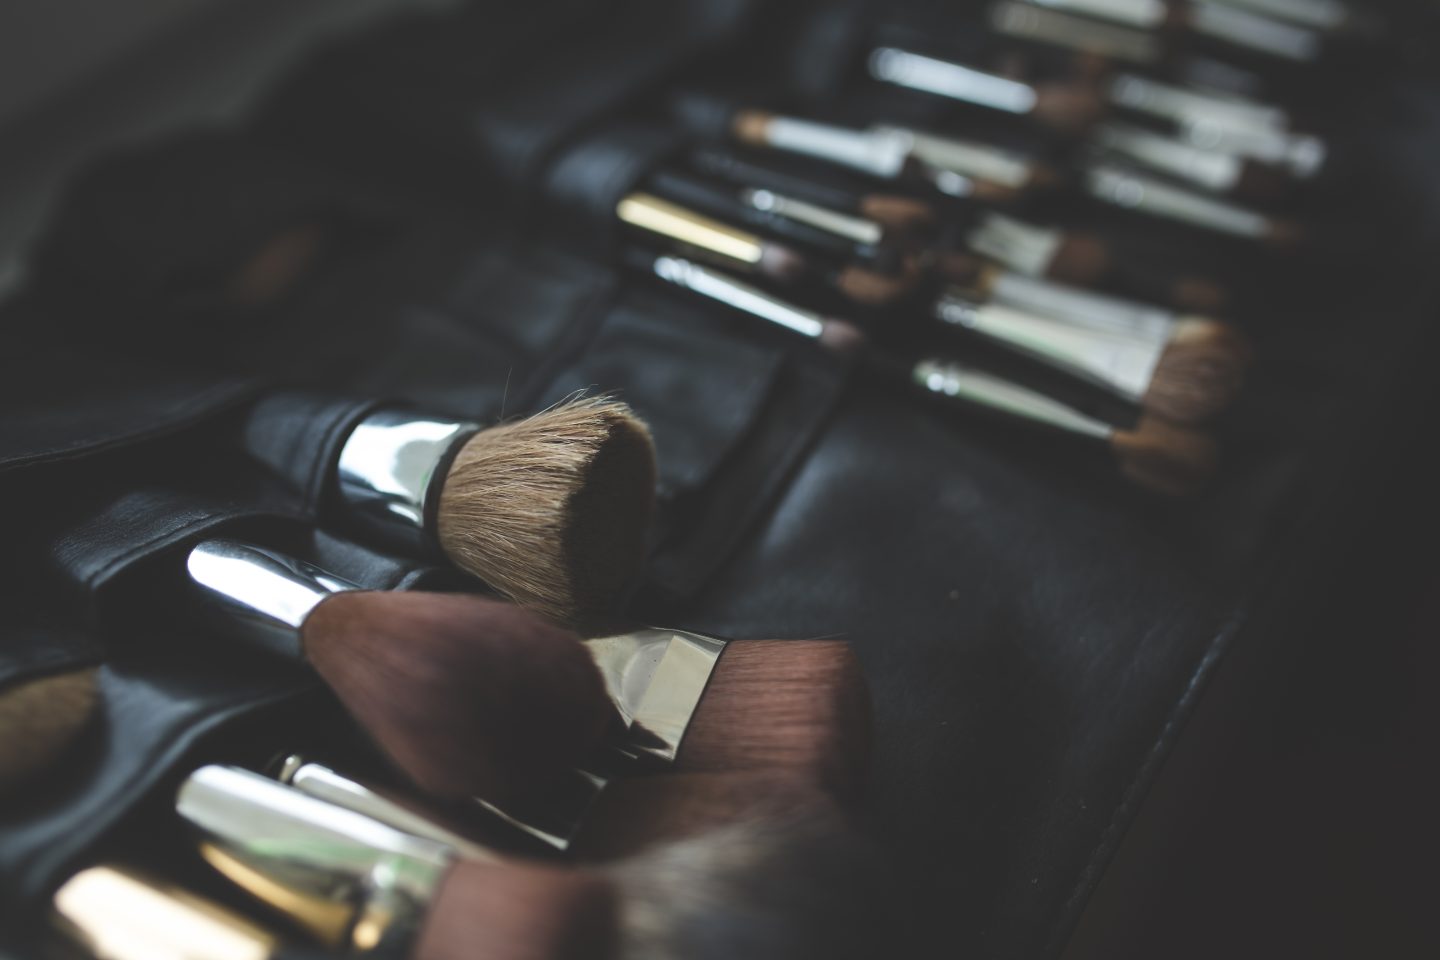 Take the hassle out of cleaning your makeup brushes!